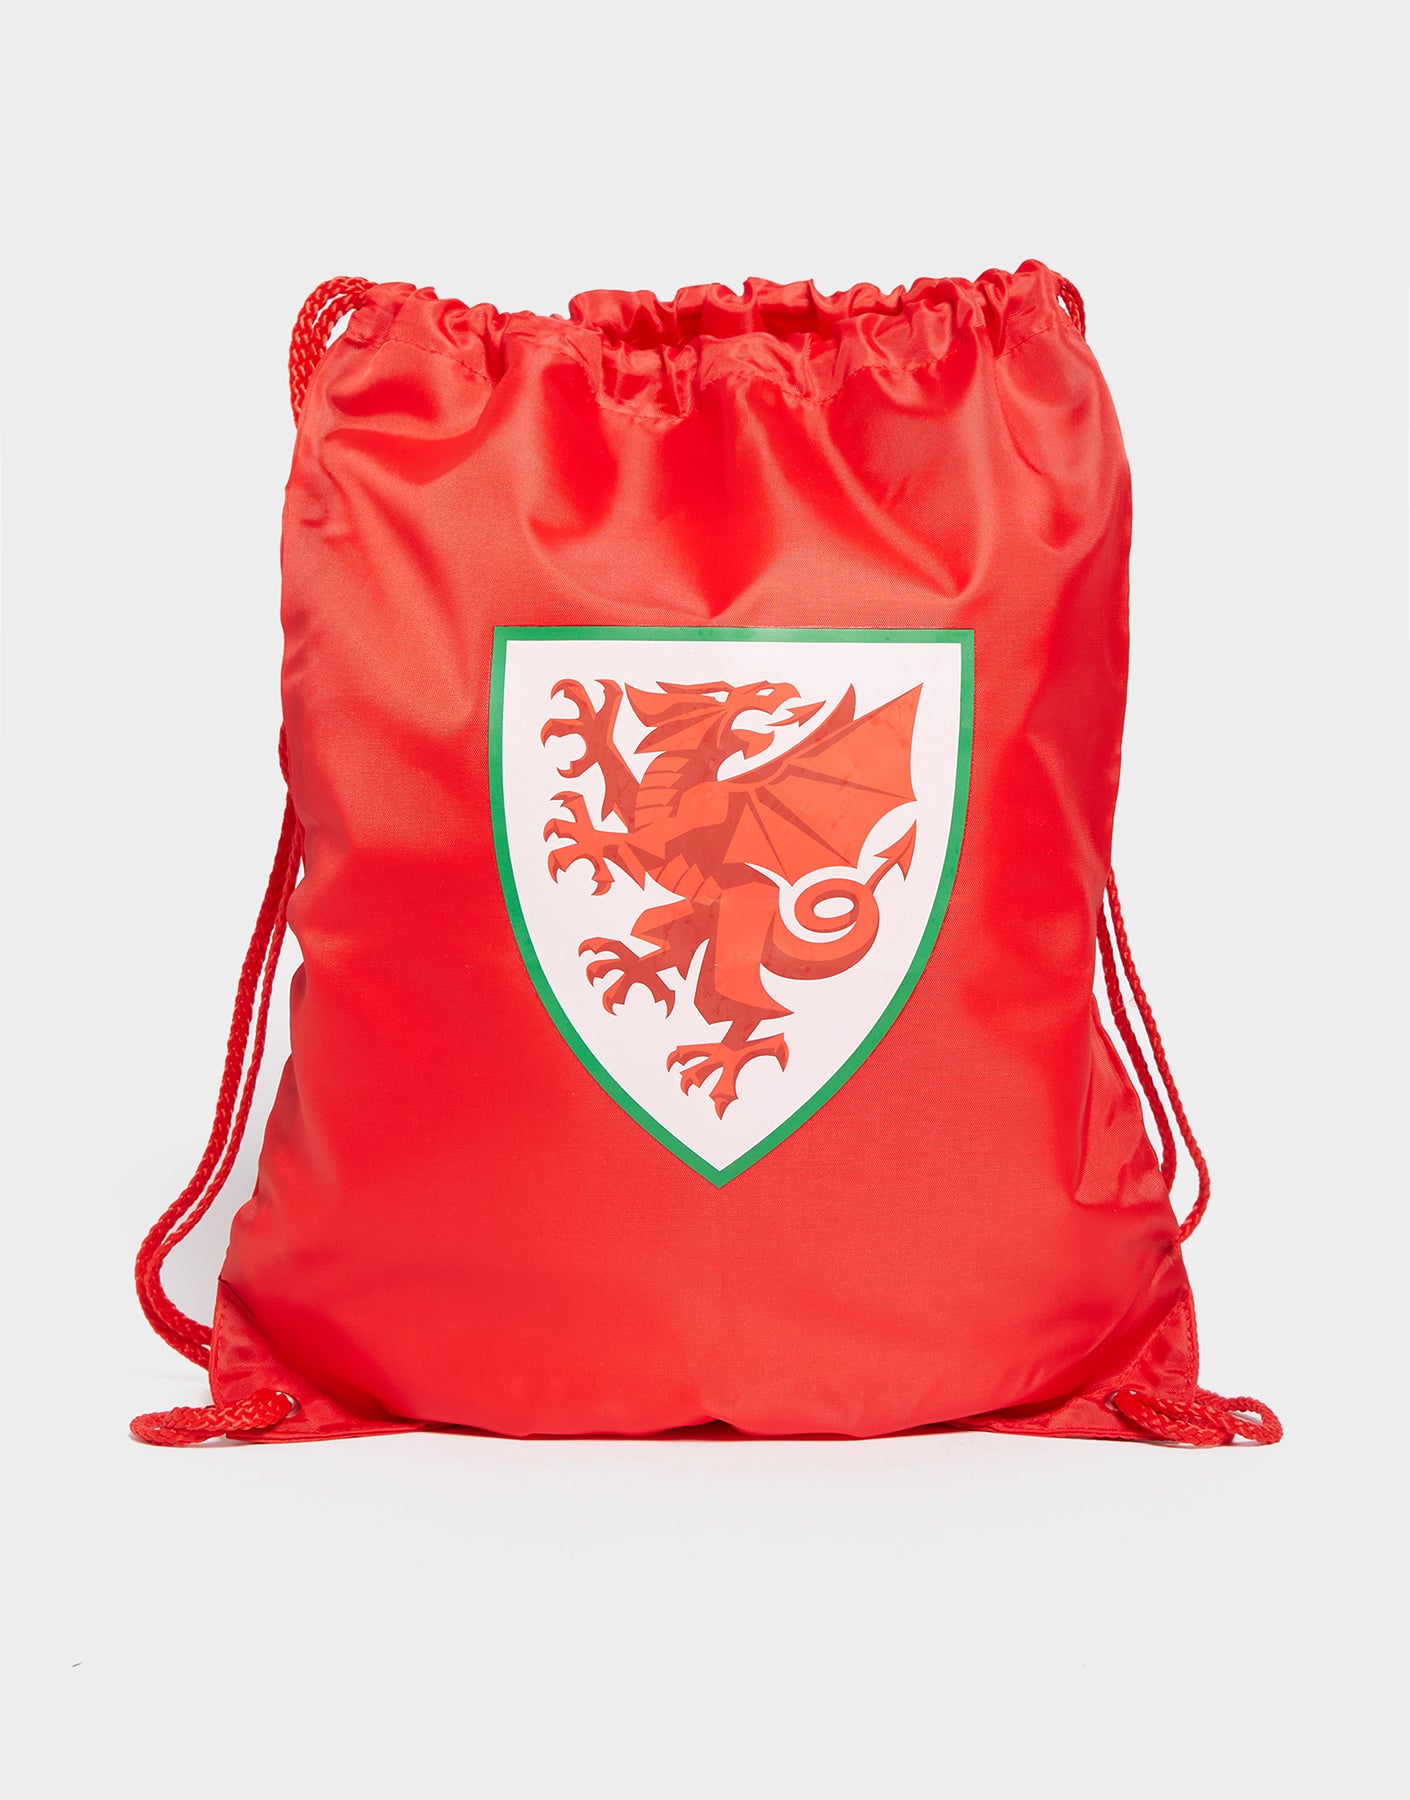 Official Team Wales Gym Sack - The World Football Store